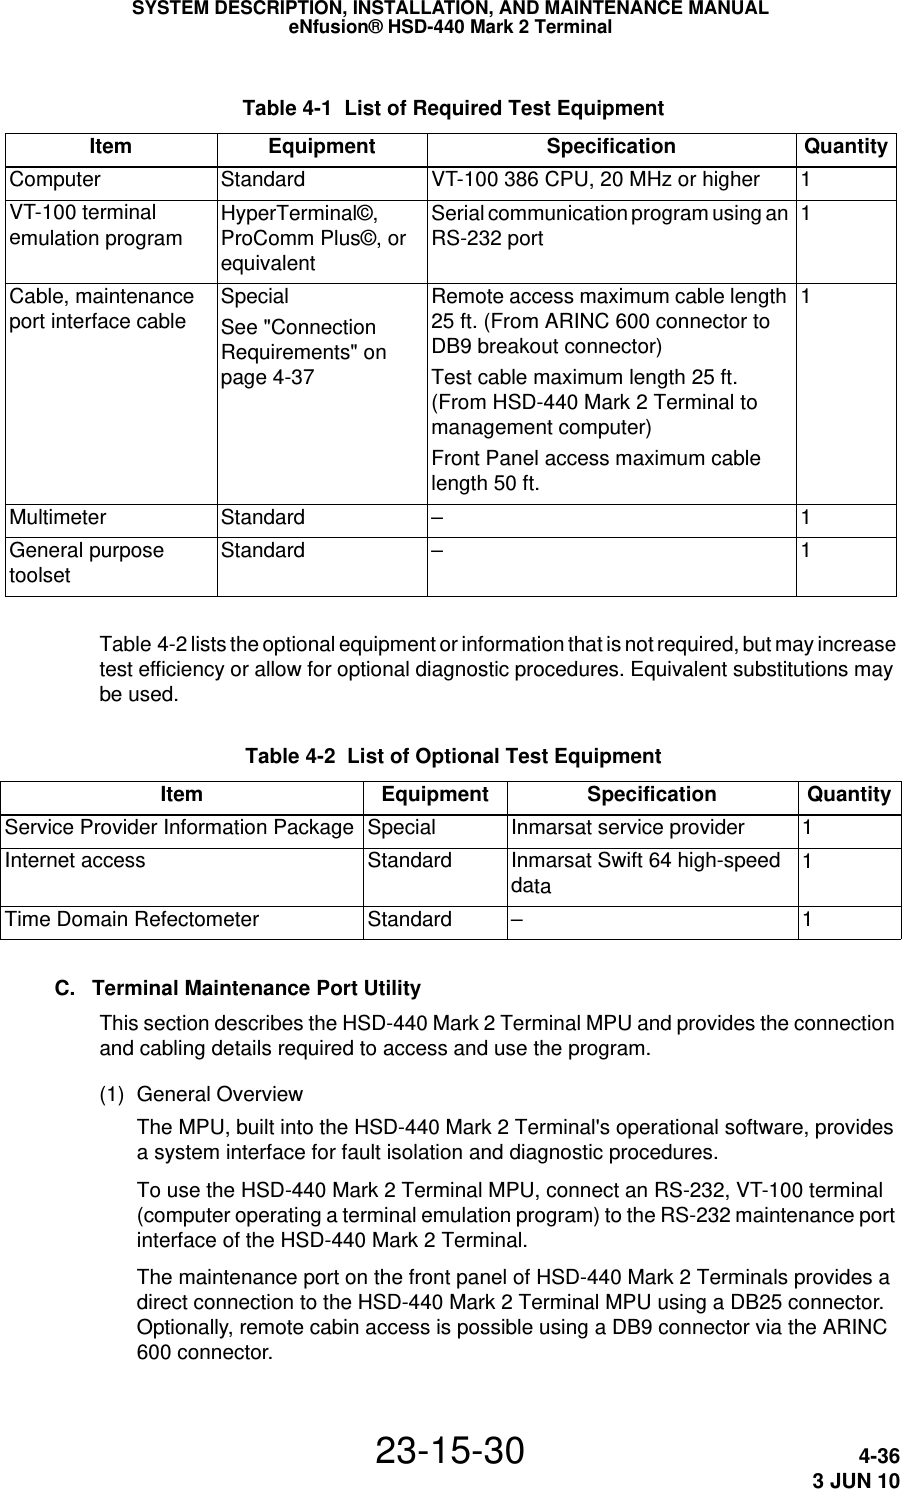  Table 4-1  List of Required Test Equipment Item Equipment Specification QuantityComputer  Standard  VT-100 386 CPU, 20 MHz or higher 1VT-100 terminal emulation program HyperTerminal©, ProComm Plus©, or equivalentSerial communication program using an RS-232 port 1Cable, maintenance port interface cable  SpecialSee &quot;Connection Requirements&quot; on page 4-37Remote access maximum cable length 25 ft. (From ARINC 600 connector to DB9 breakout connector) Test cable maximum length 25 ft.  (From HSD-440 Mark 2 Terminal to management computer) Front Panel access maximum cable length 50 ft. 1Multimeter Standard – 1General purpose toolset Standard – 1SYSTEM DESCRIPTION, INSTALLATION, AND MAINTENANCE MANUALeNfusion® HSD-440 Mark 2 Terminal23-15-30 4-363 JUN 10Table 4-2 lists the optional equipment or information that is not required, but may increase test efficiency or allow for optional diagnostic procedures. Equivalent substitutions may be used. Table 4-2  List of Optional Test Equipment Item Equipment Specification QuantityService Provider Information Package Special Inmarsat service provider 1Internet access Standard Inmarsat Swift 64 high-speed data 1Time Domain Refectometer Standard  – 1C. Terminal Maintenance Port UtilityThis section describes the HSD-440 Mark 2 Terminal MPU and provides the connection and cabling details required to access and use the program.(1) General OverviewThe MPU, built into the HSD-440 Mark 2 Terminal&apos;s operational software, provides a system interface for fault isolation and diagnostic procedures.To use the HSD-440 Mark 2 Terminal MPU, connect an RS-232, VT-100 terminal (computer operating a terminal emulation program) to the RS-232 maintenance port interface of the HSD-440 Mark 2 Terminal. The maintenance port on the front panel of HSD-440 Mark 2 Terminals provides a direct connection to the HSD-440 Mark 2 Terminal MPU using a DB25 connector. Optionally, remote cabin access is possible using a DB9 connector via the ARINC 600 connector. 